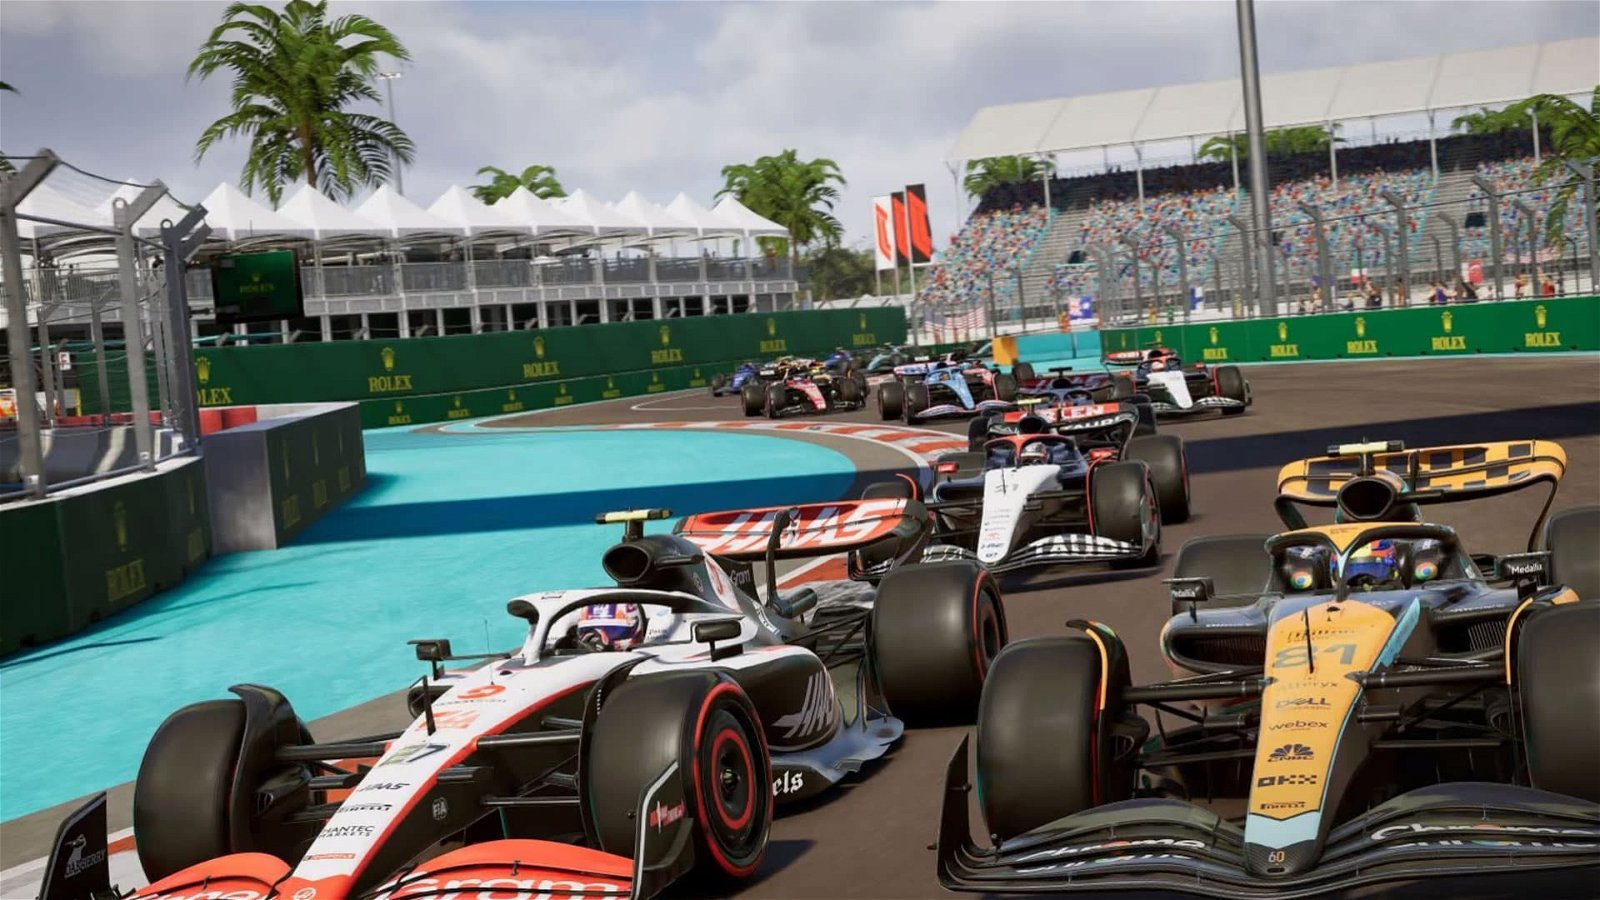 F1 23 is the PS5 game that finally got me into the sport